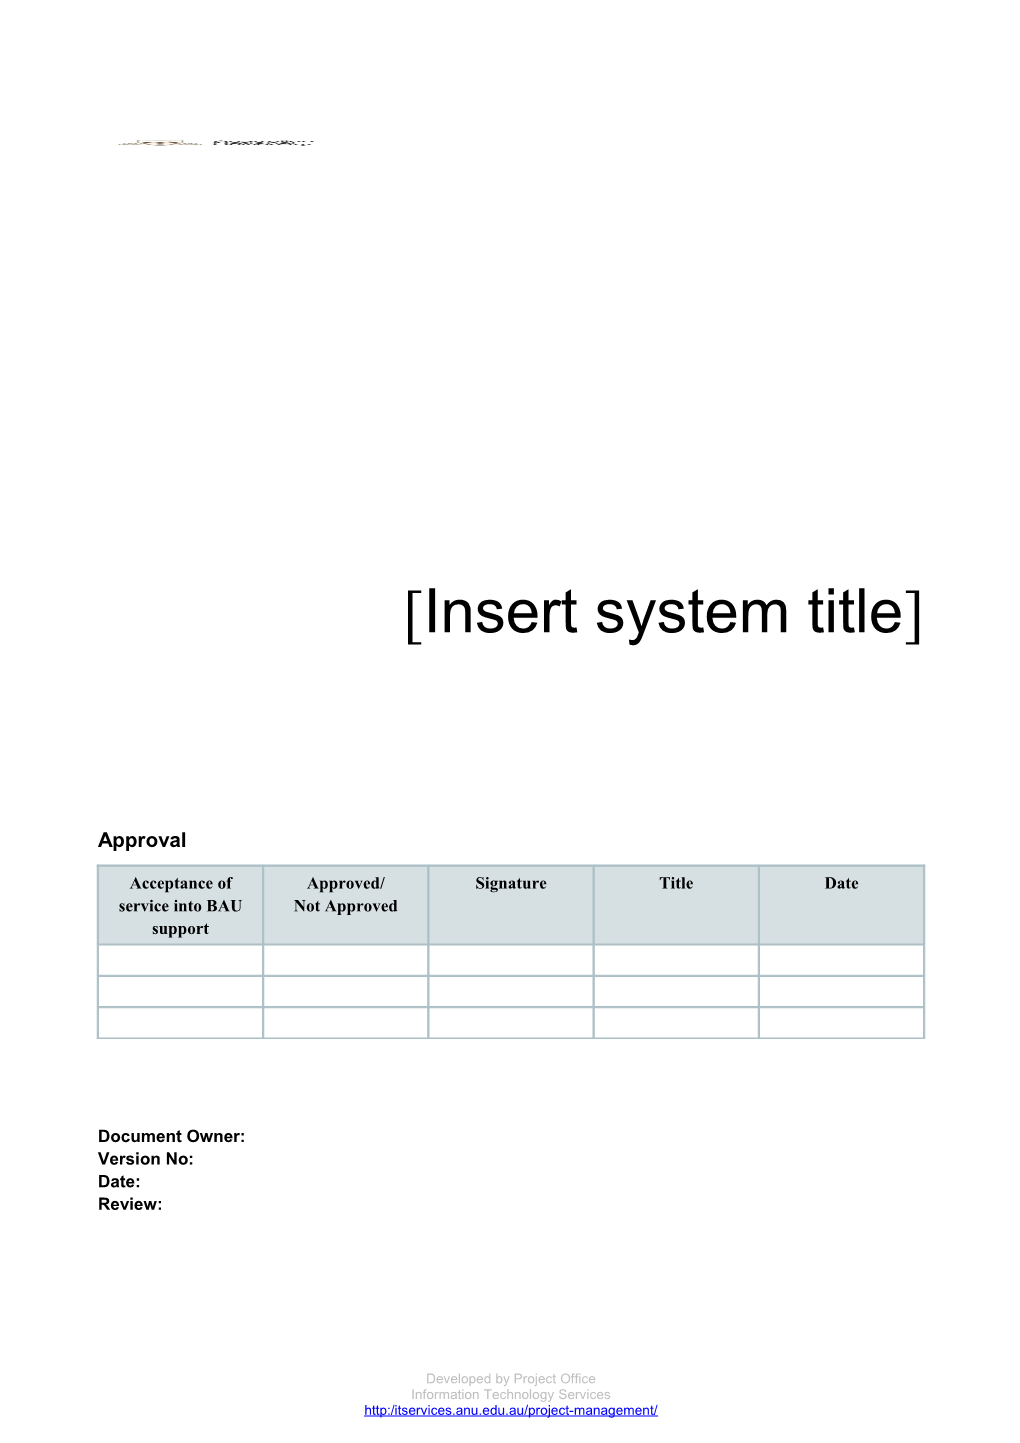 SERVICE MANAGEMENT OPERATIONAL ACCEPTANCE Insert Project Title